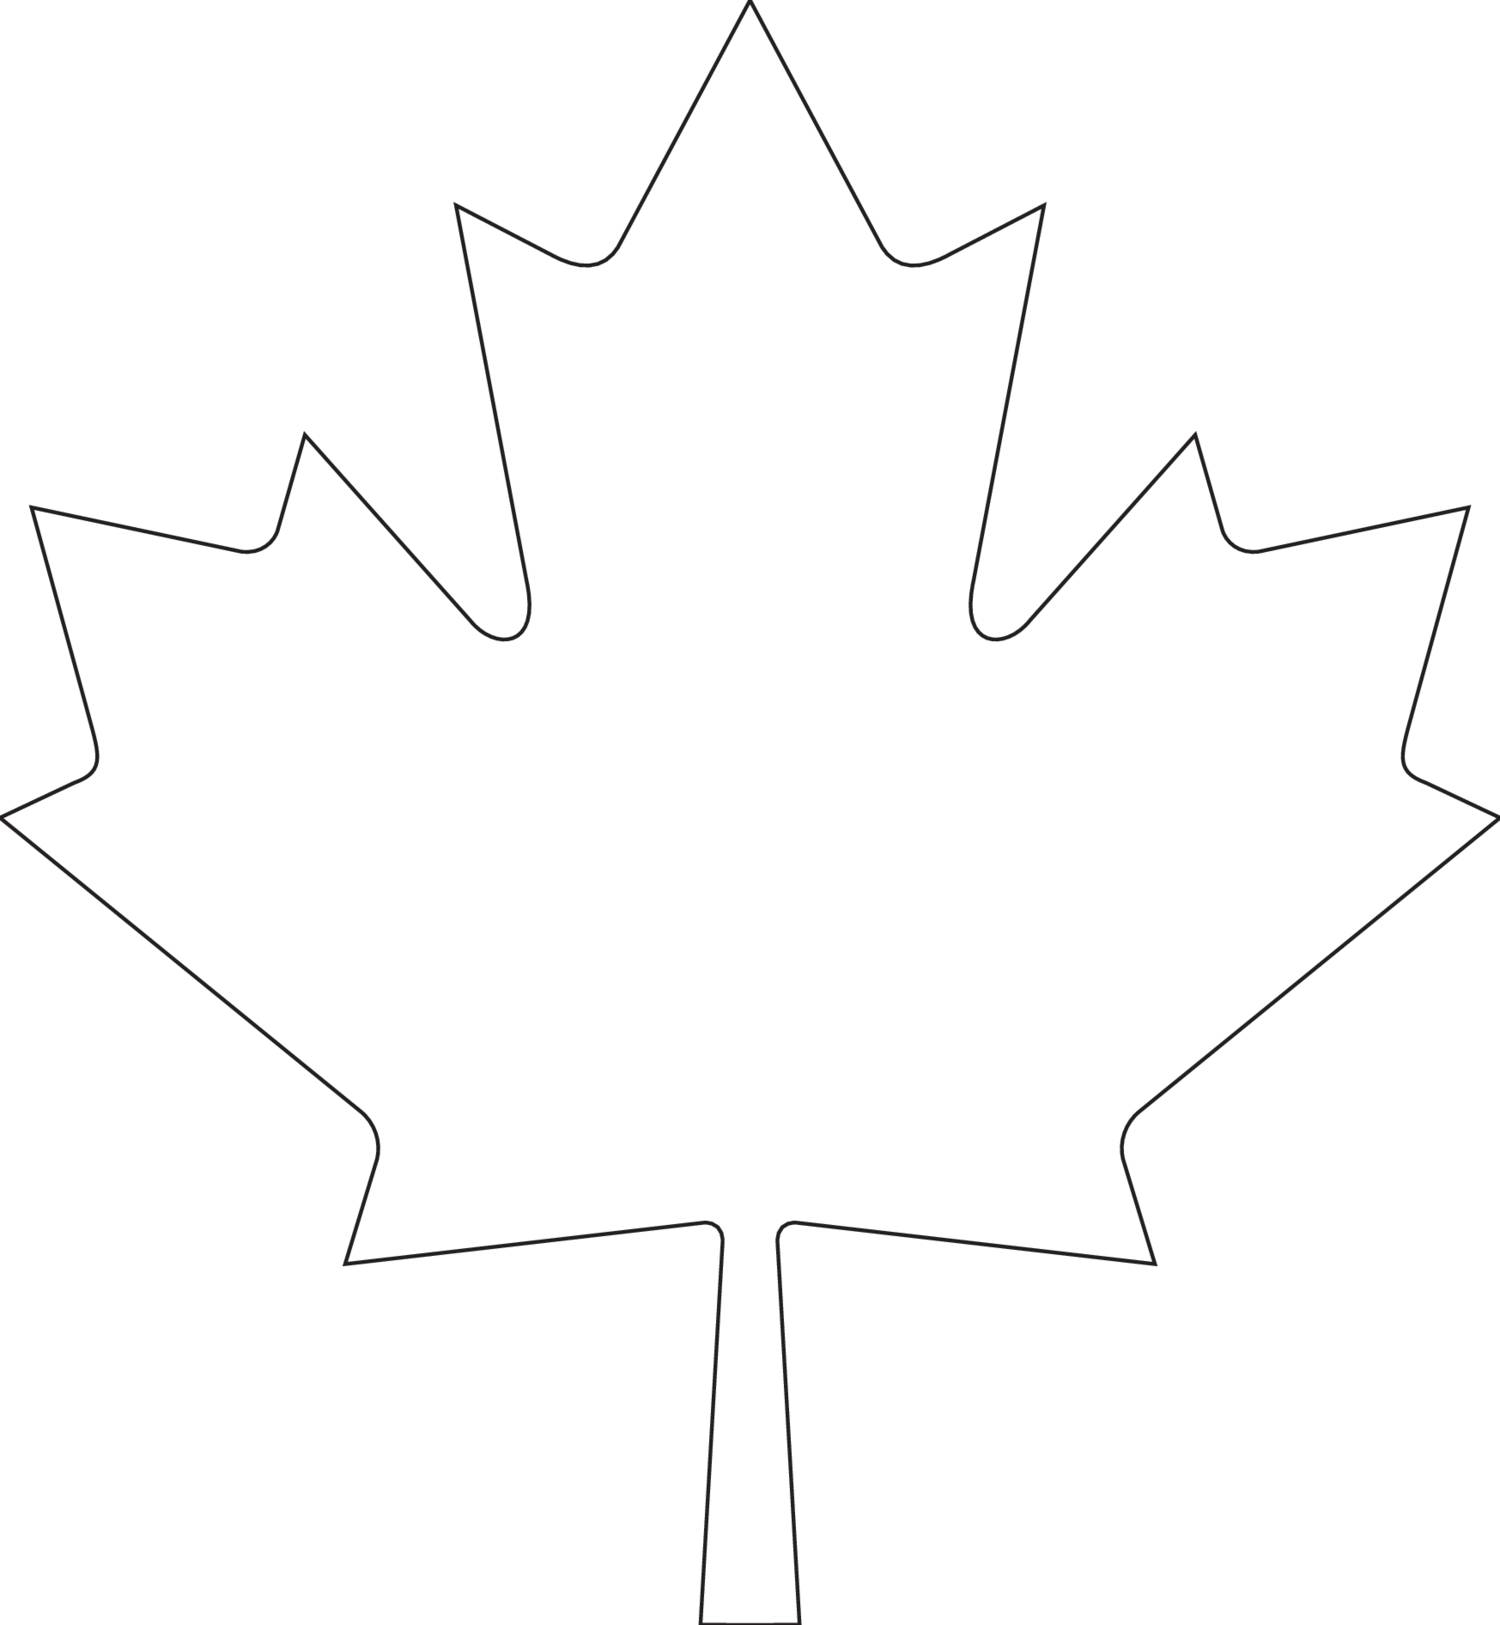 Canada Day Maple Leaf Template pdf DocDroid